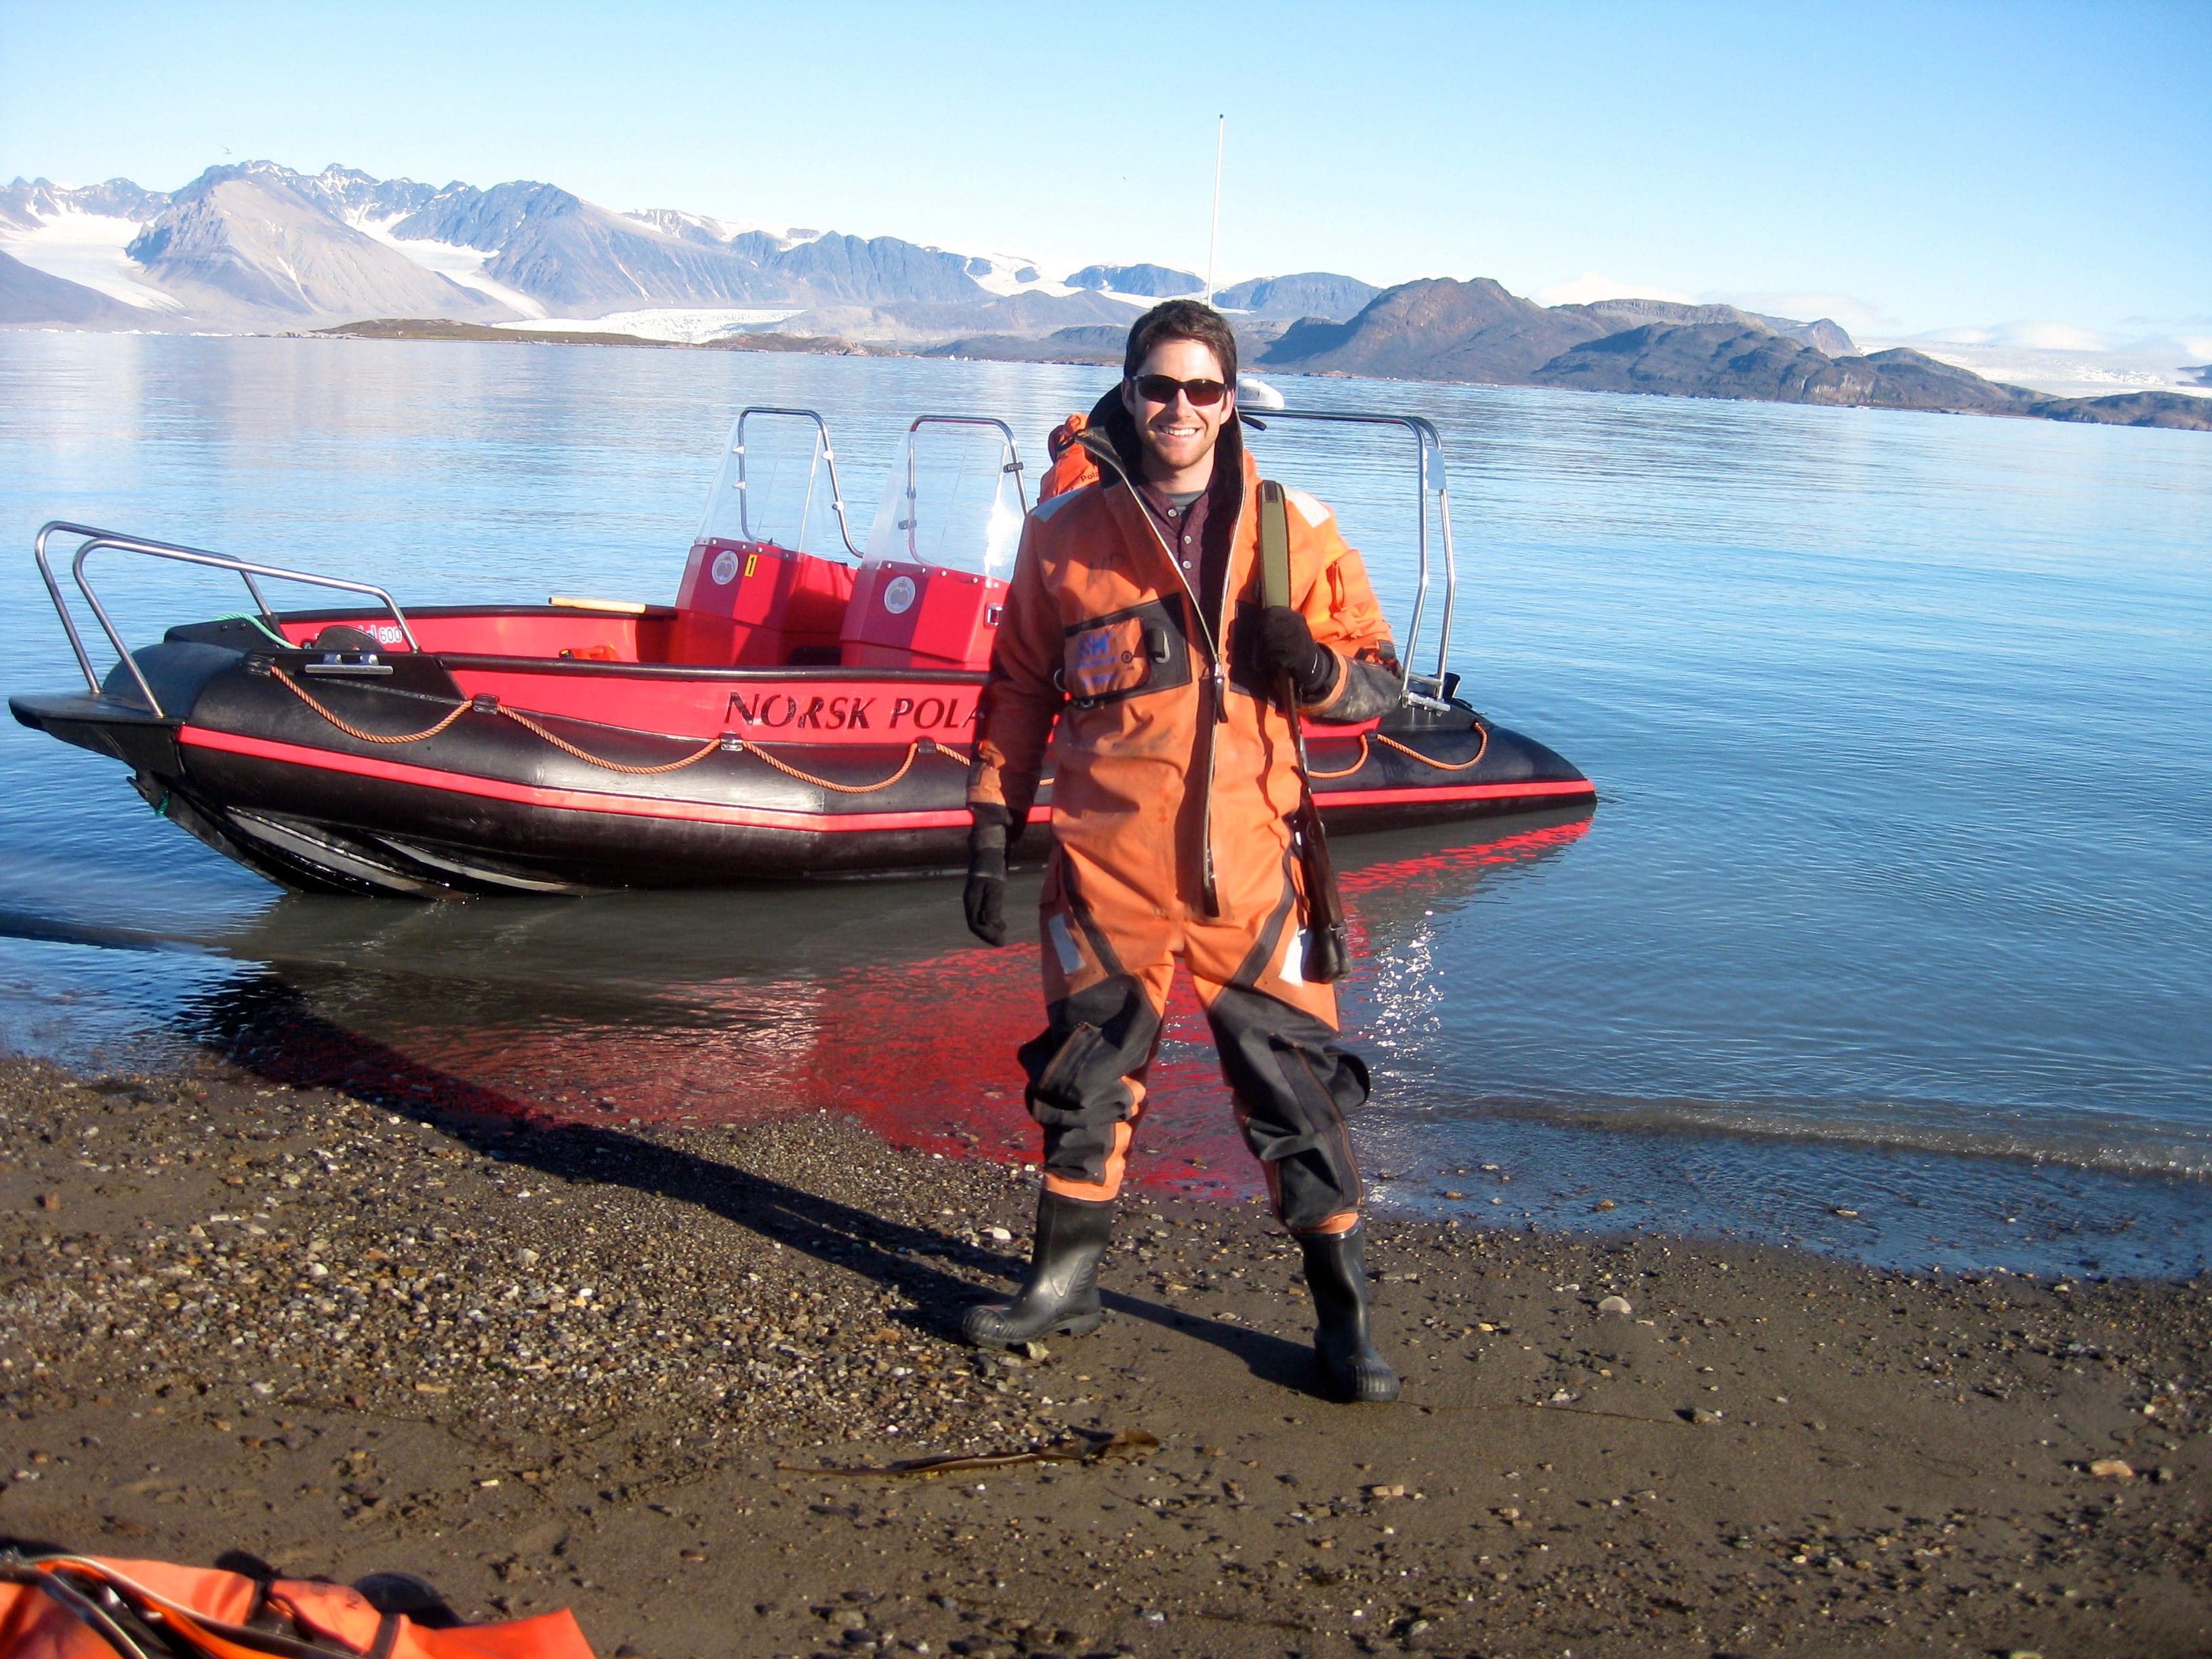 Myself suited up in a drysuit before taking the boat out to collect glacial runoff samples (again near Ny-Ålesund, Norway) in summer